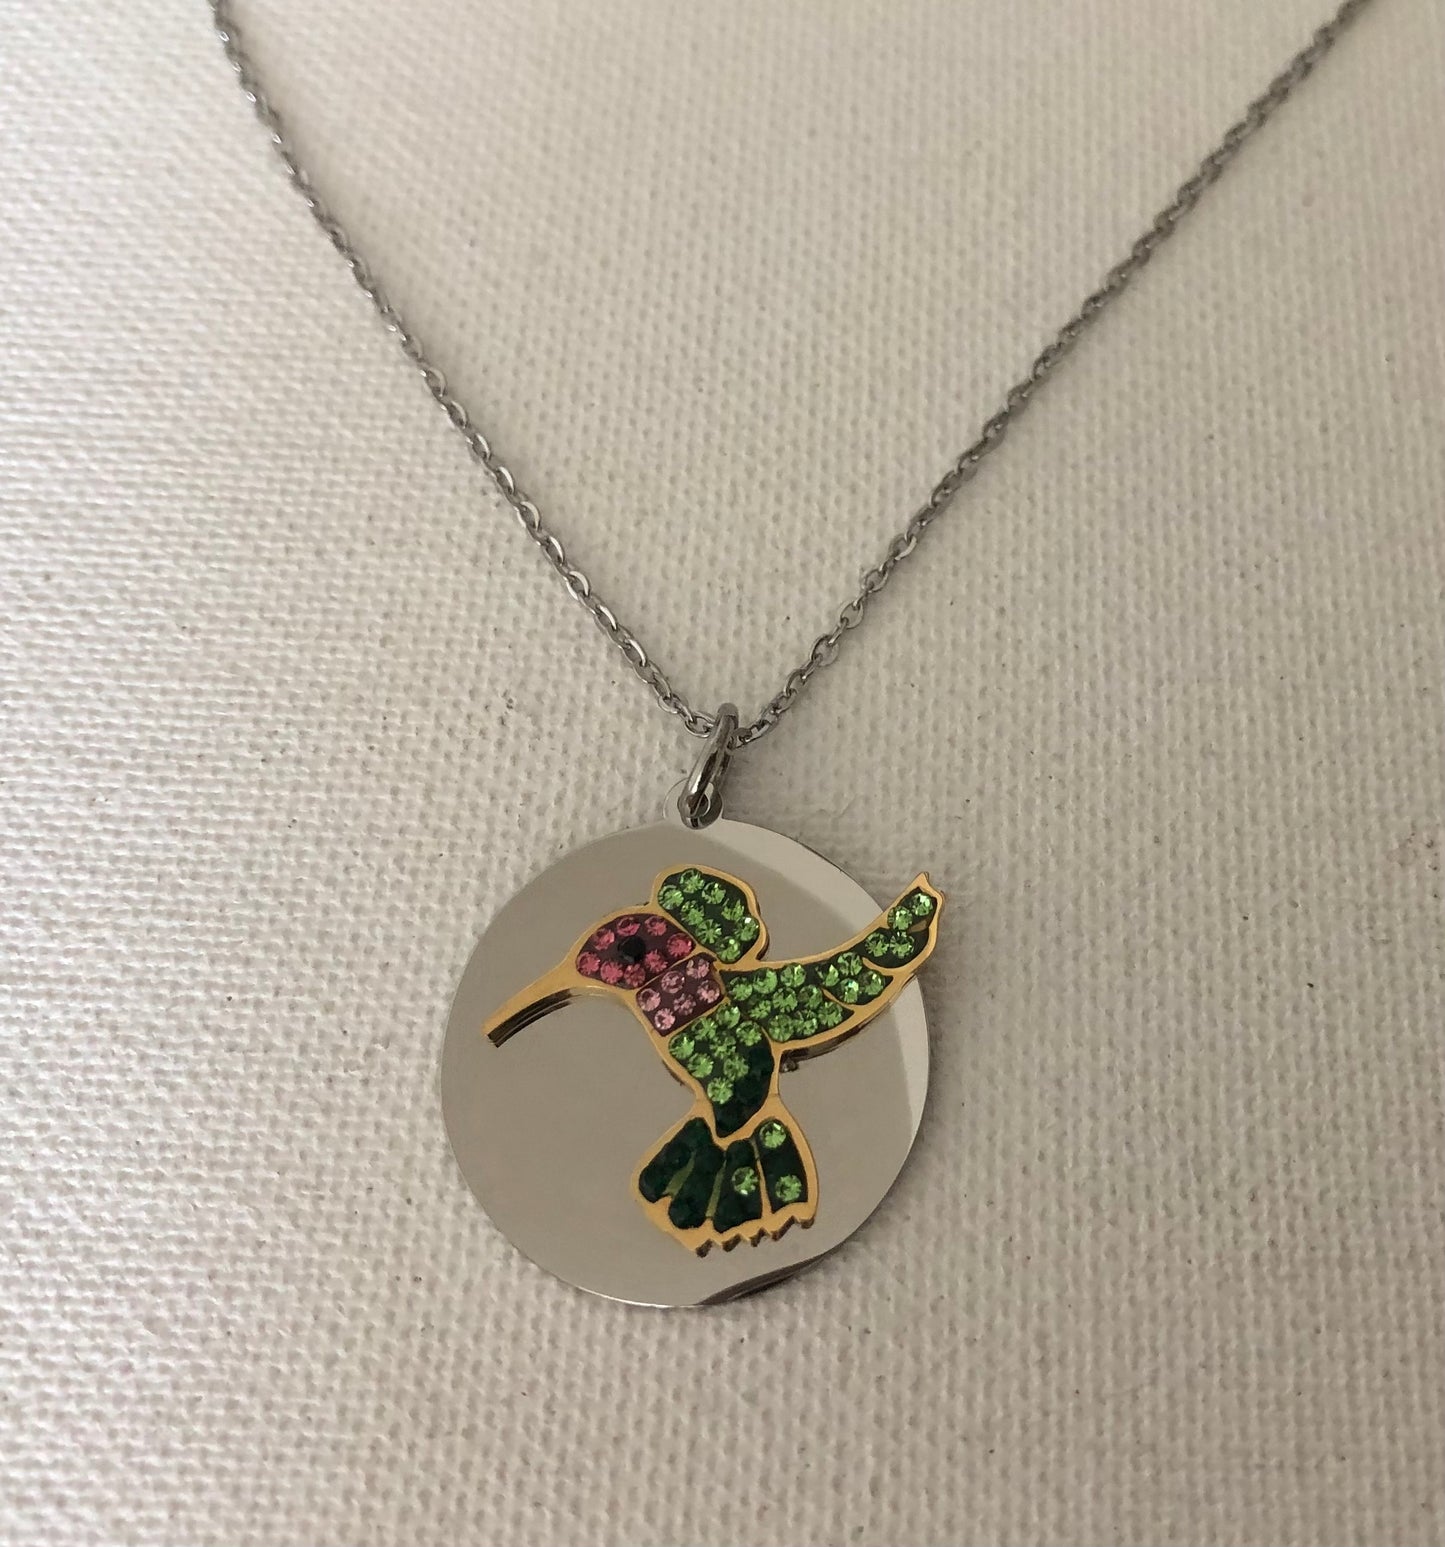 Hummingbird Carded BLING Petite - Necklace